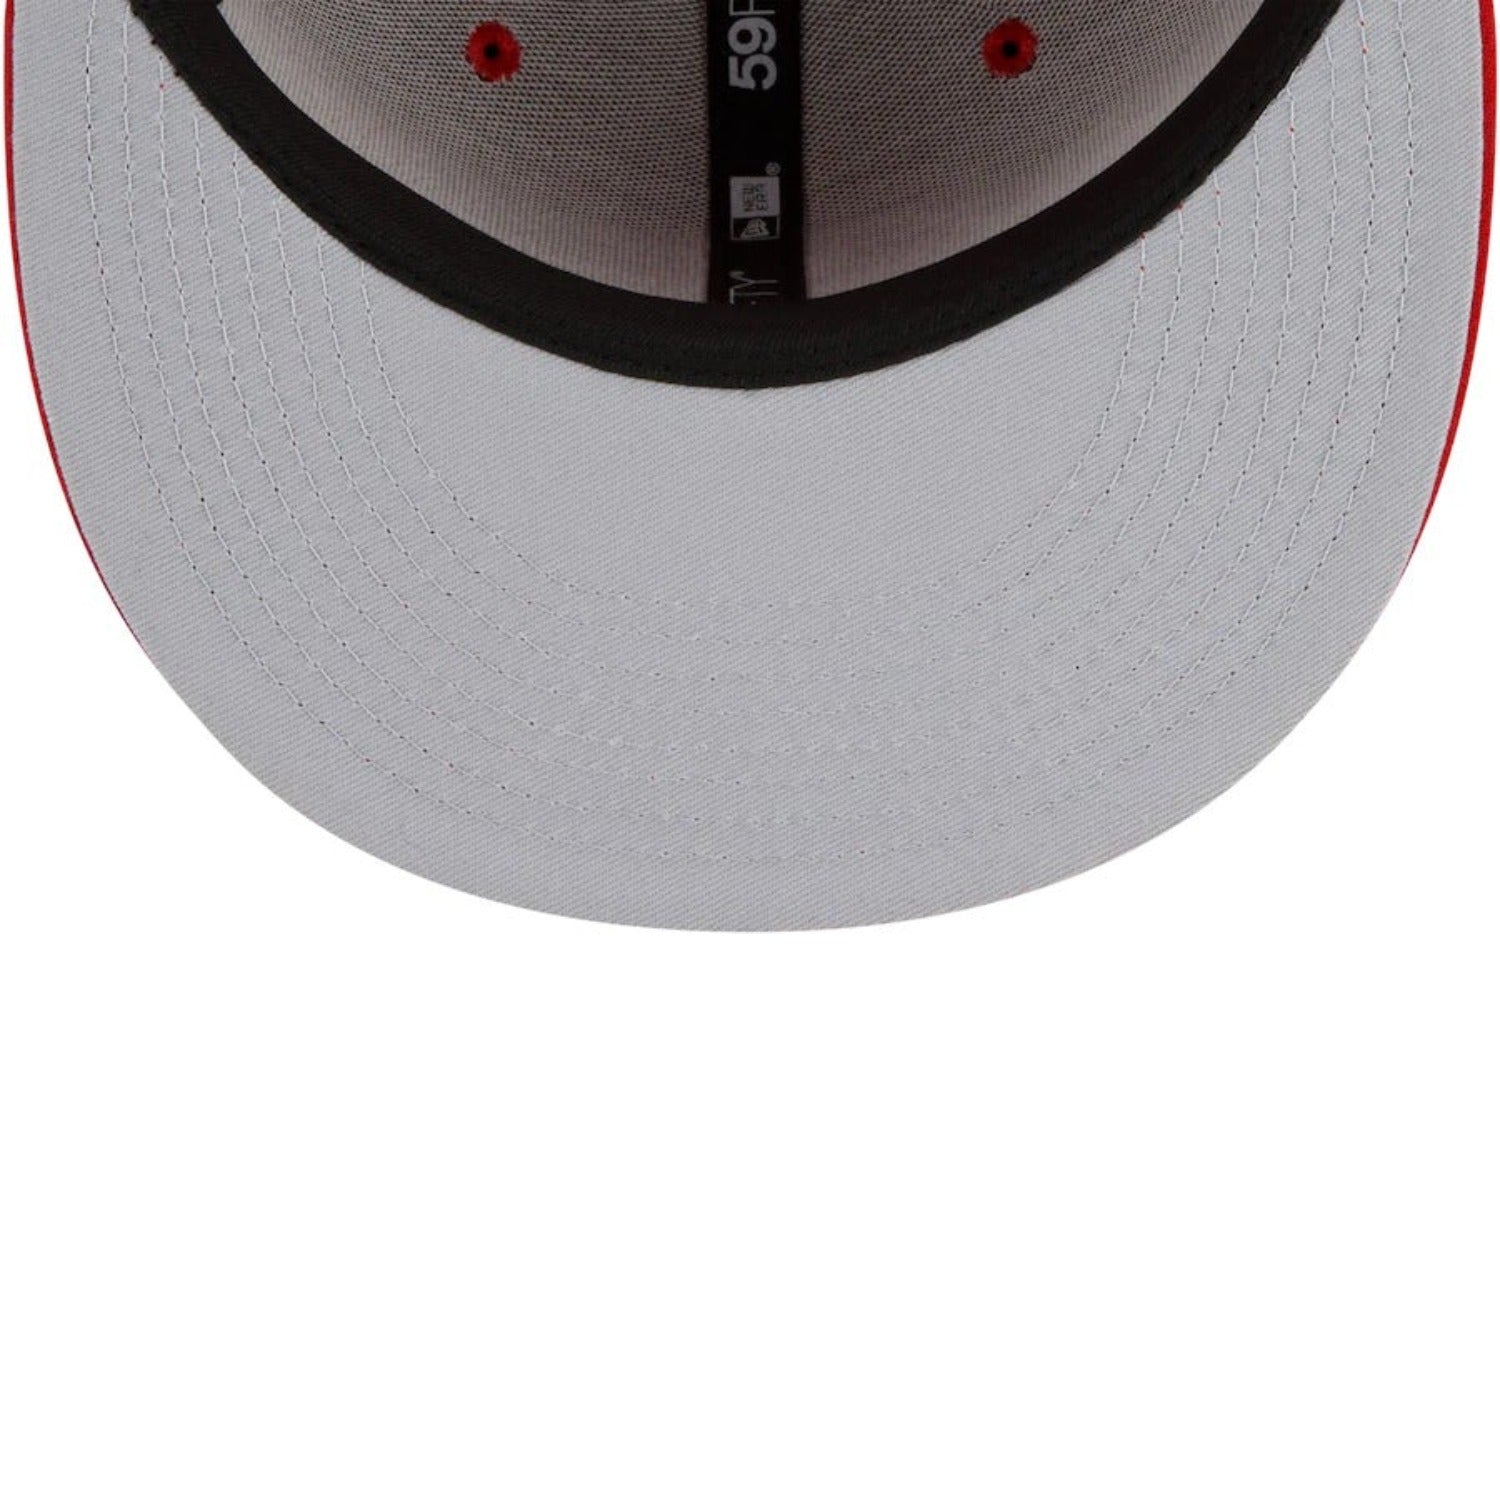 San Francisco 49ers New Era 5x Super Bowl Champions Count The Rings 59FIFTY Fitted Hat - Scarlet Nvsocer.com